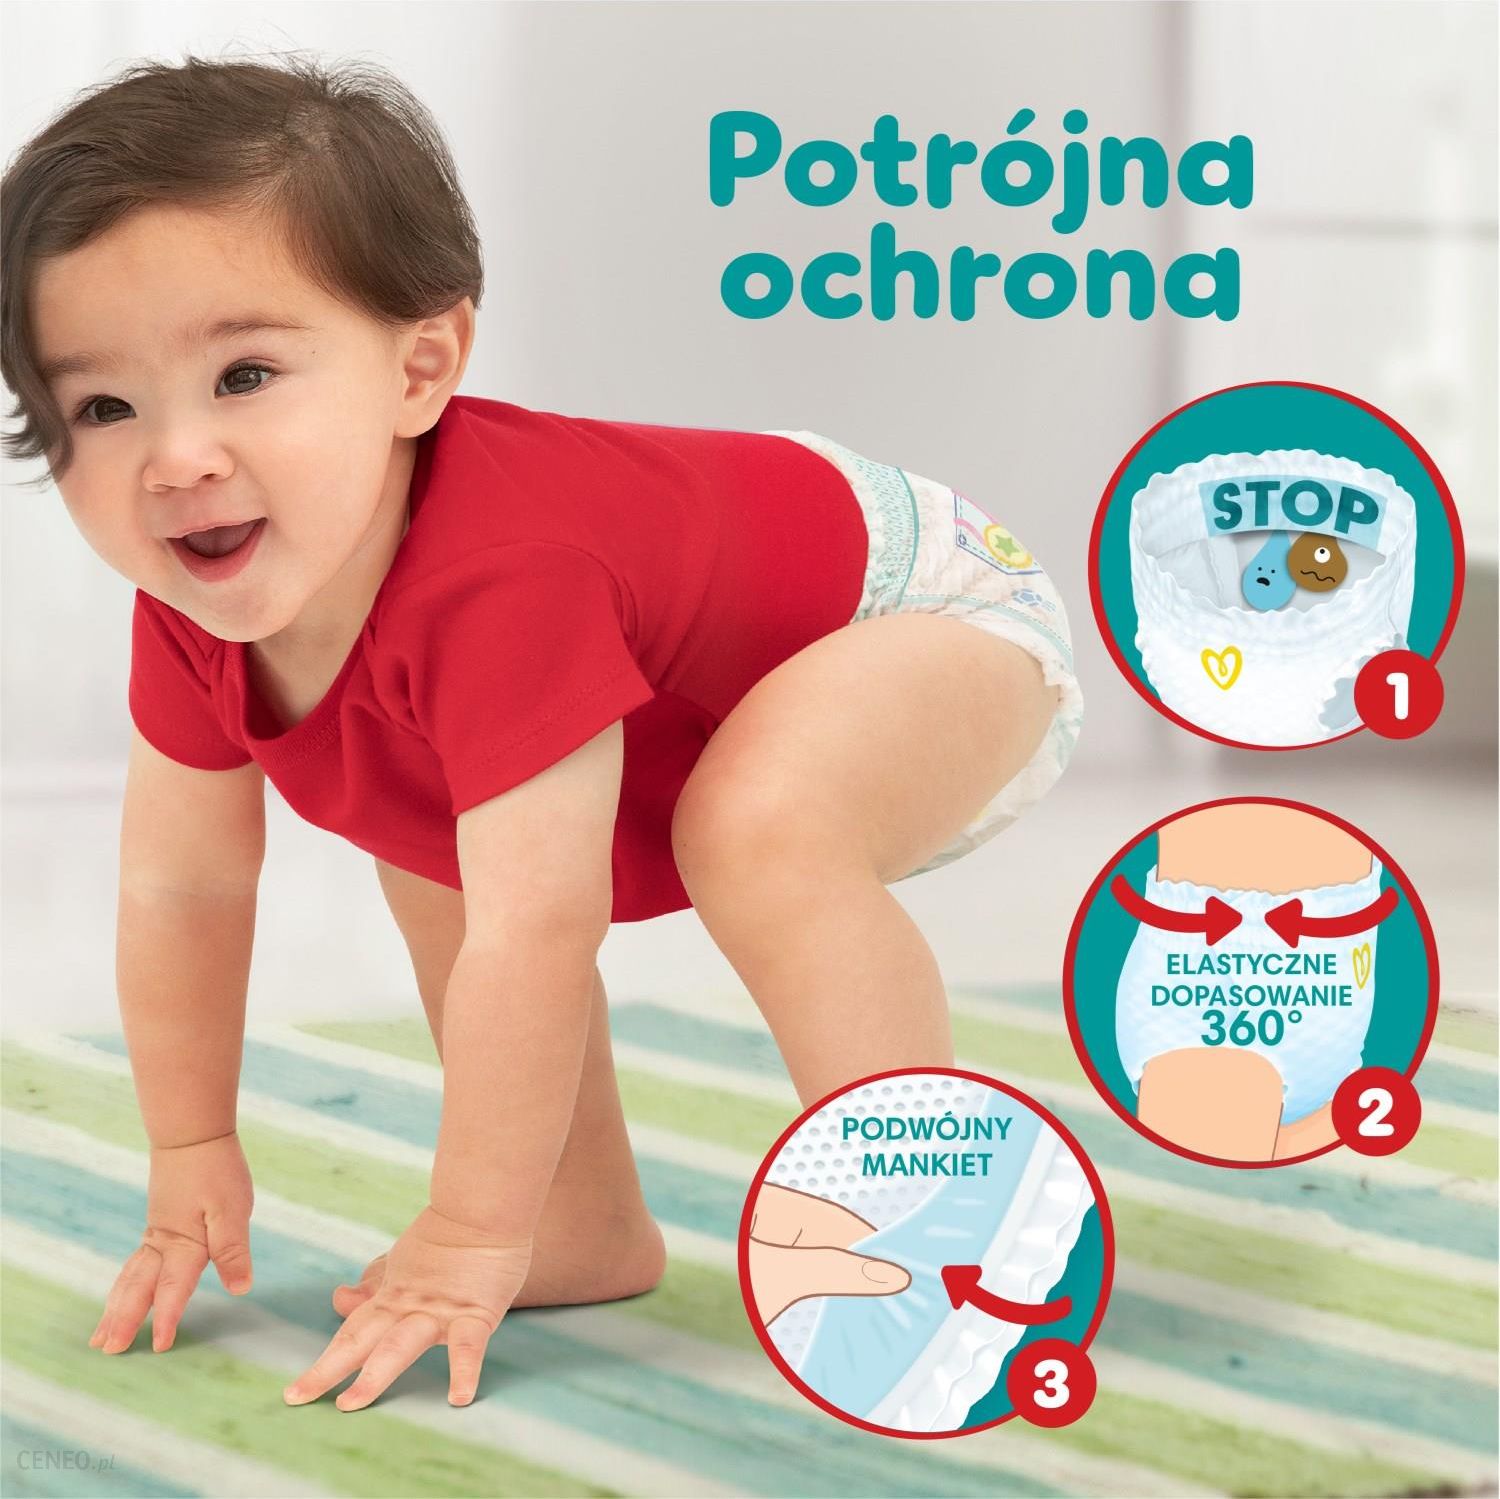 pampers pants taniomania